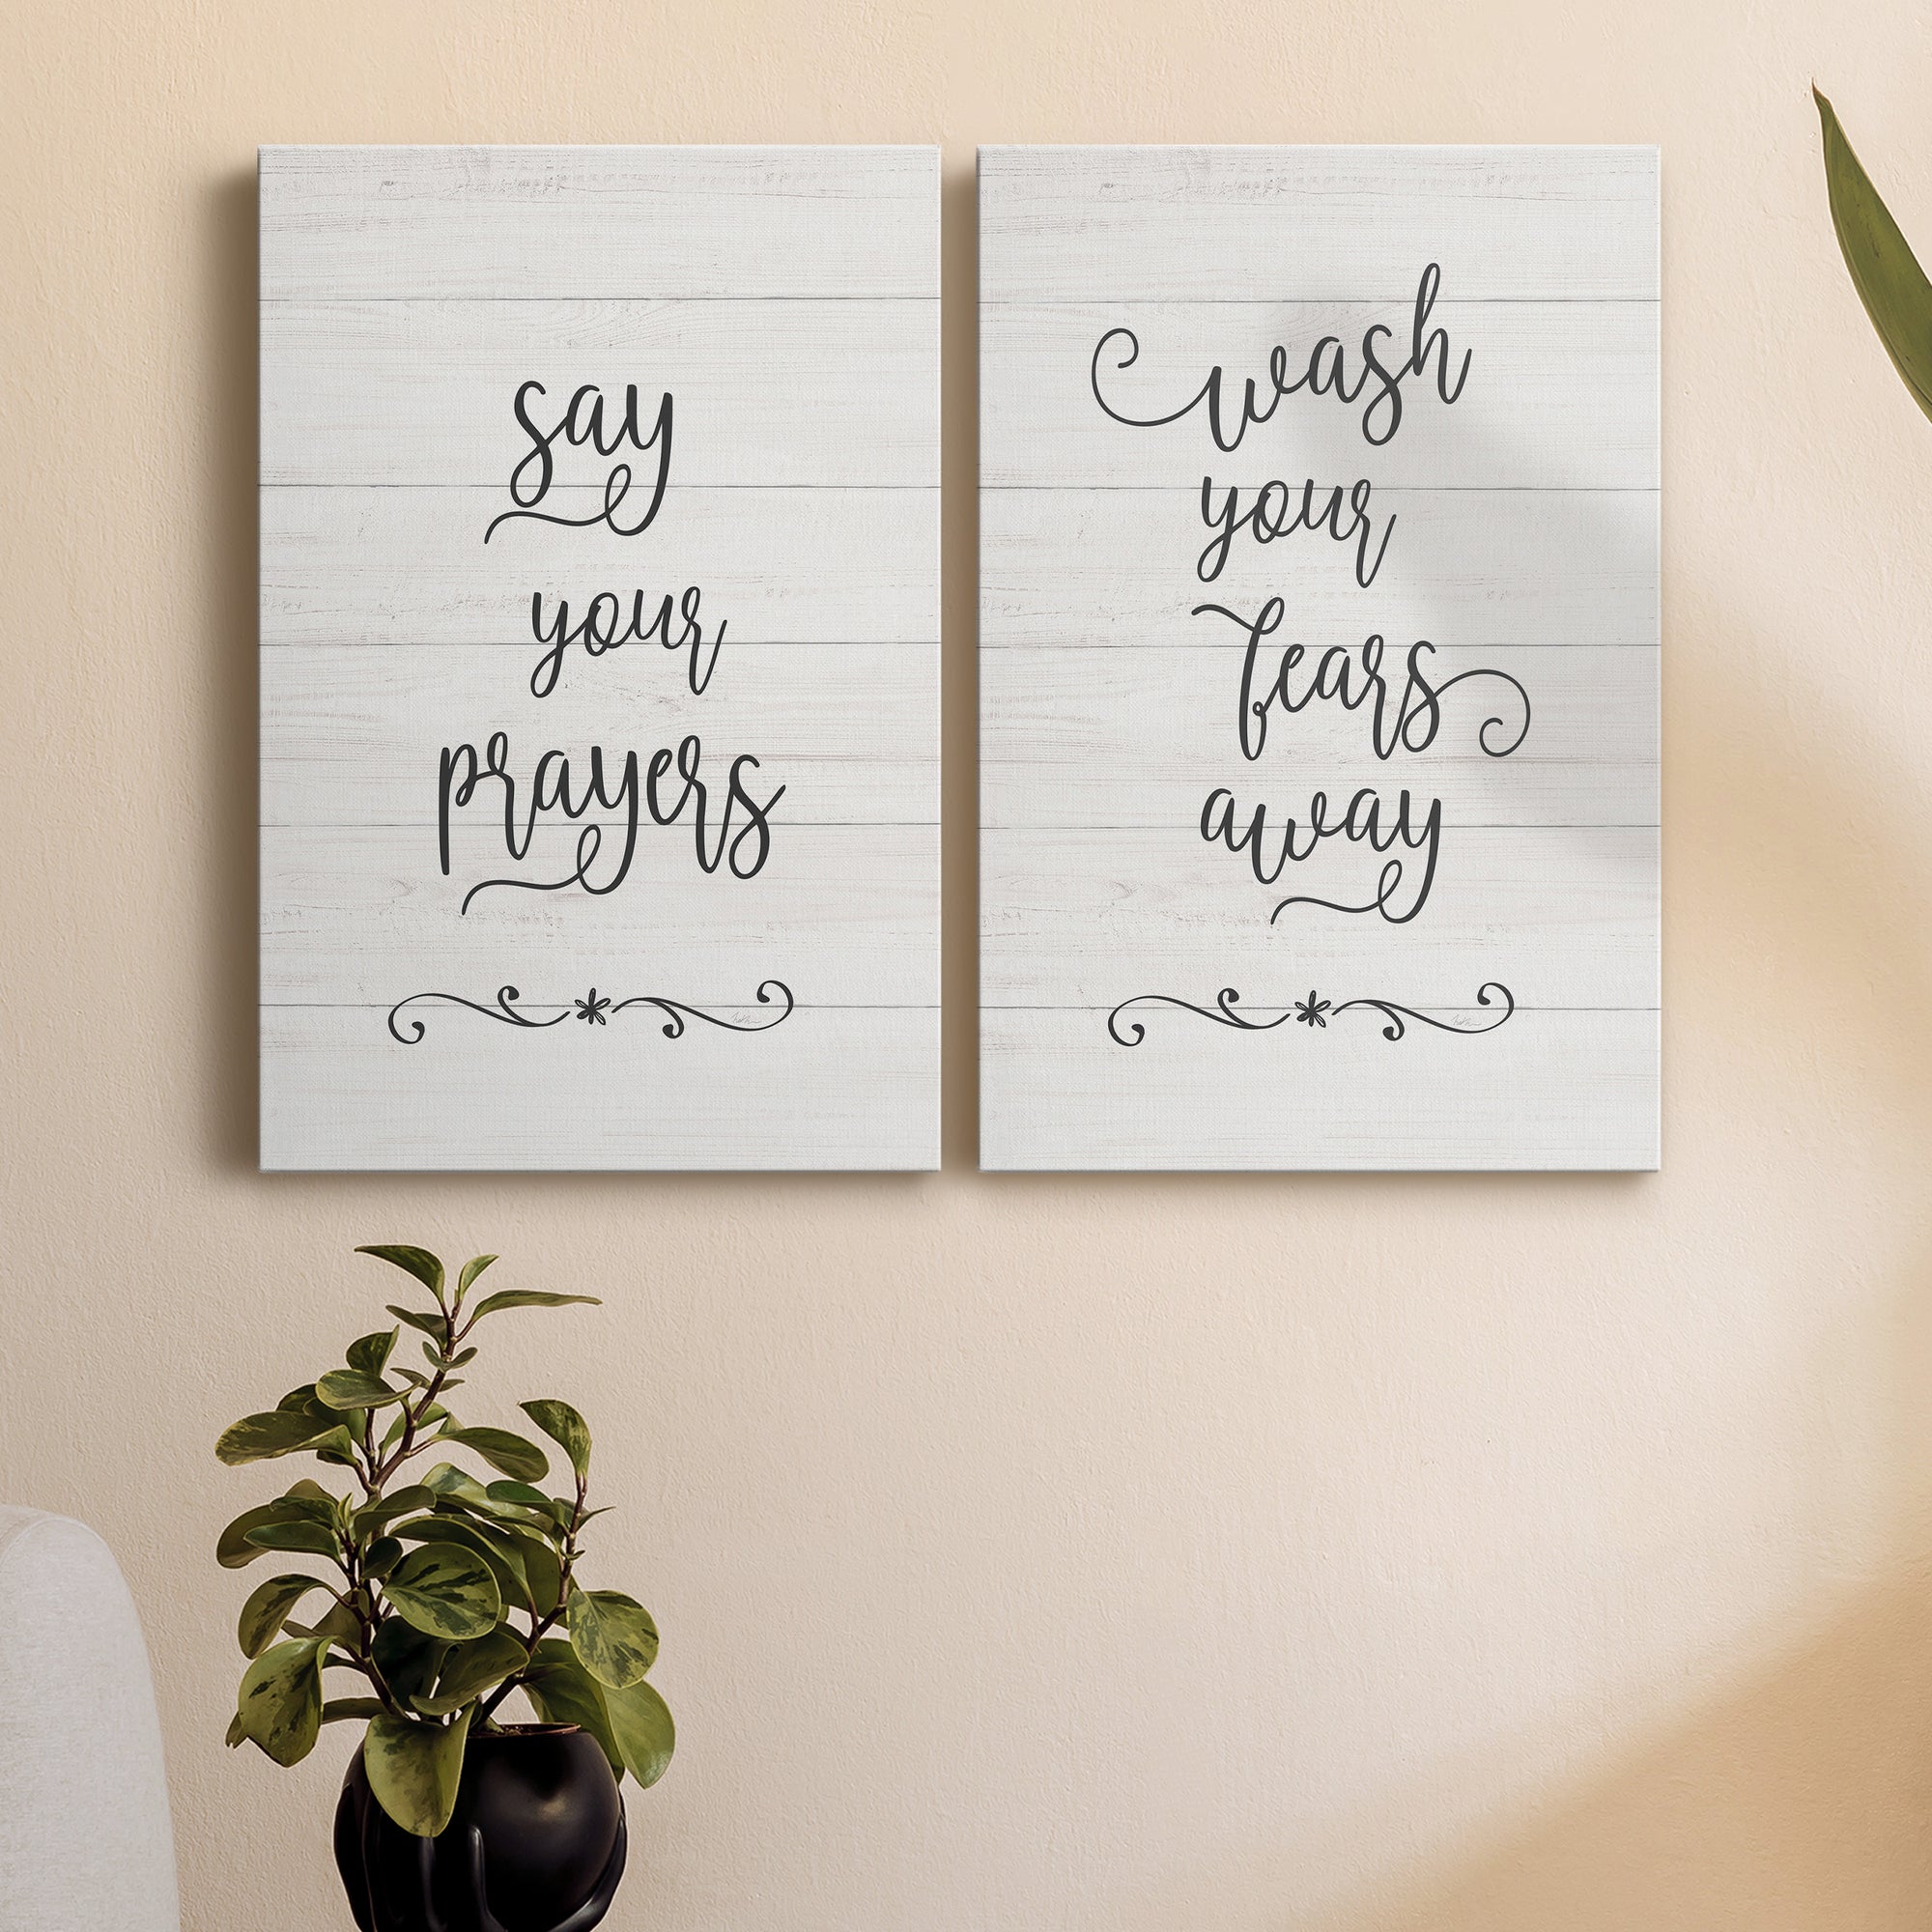 Say Your Prayers Premium Gallery Wrapped Canvas - Ready to Hang - Set of 2 - 8 x 12 Each